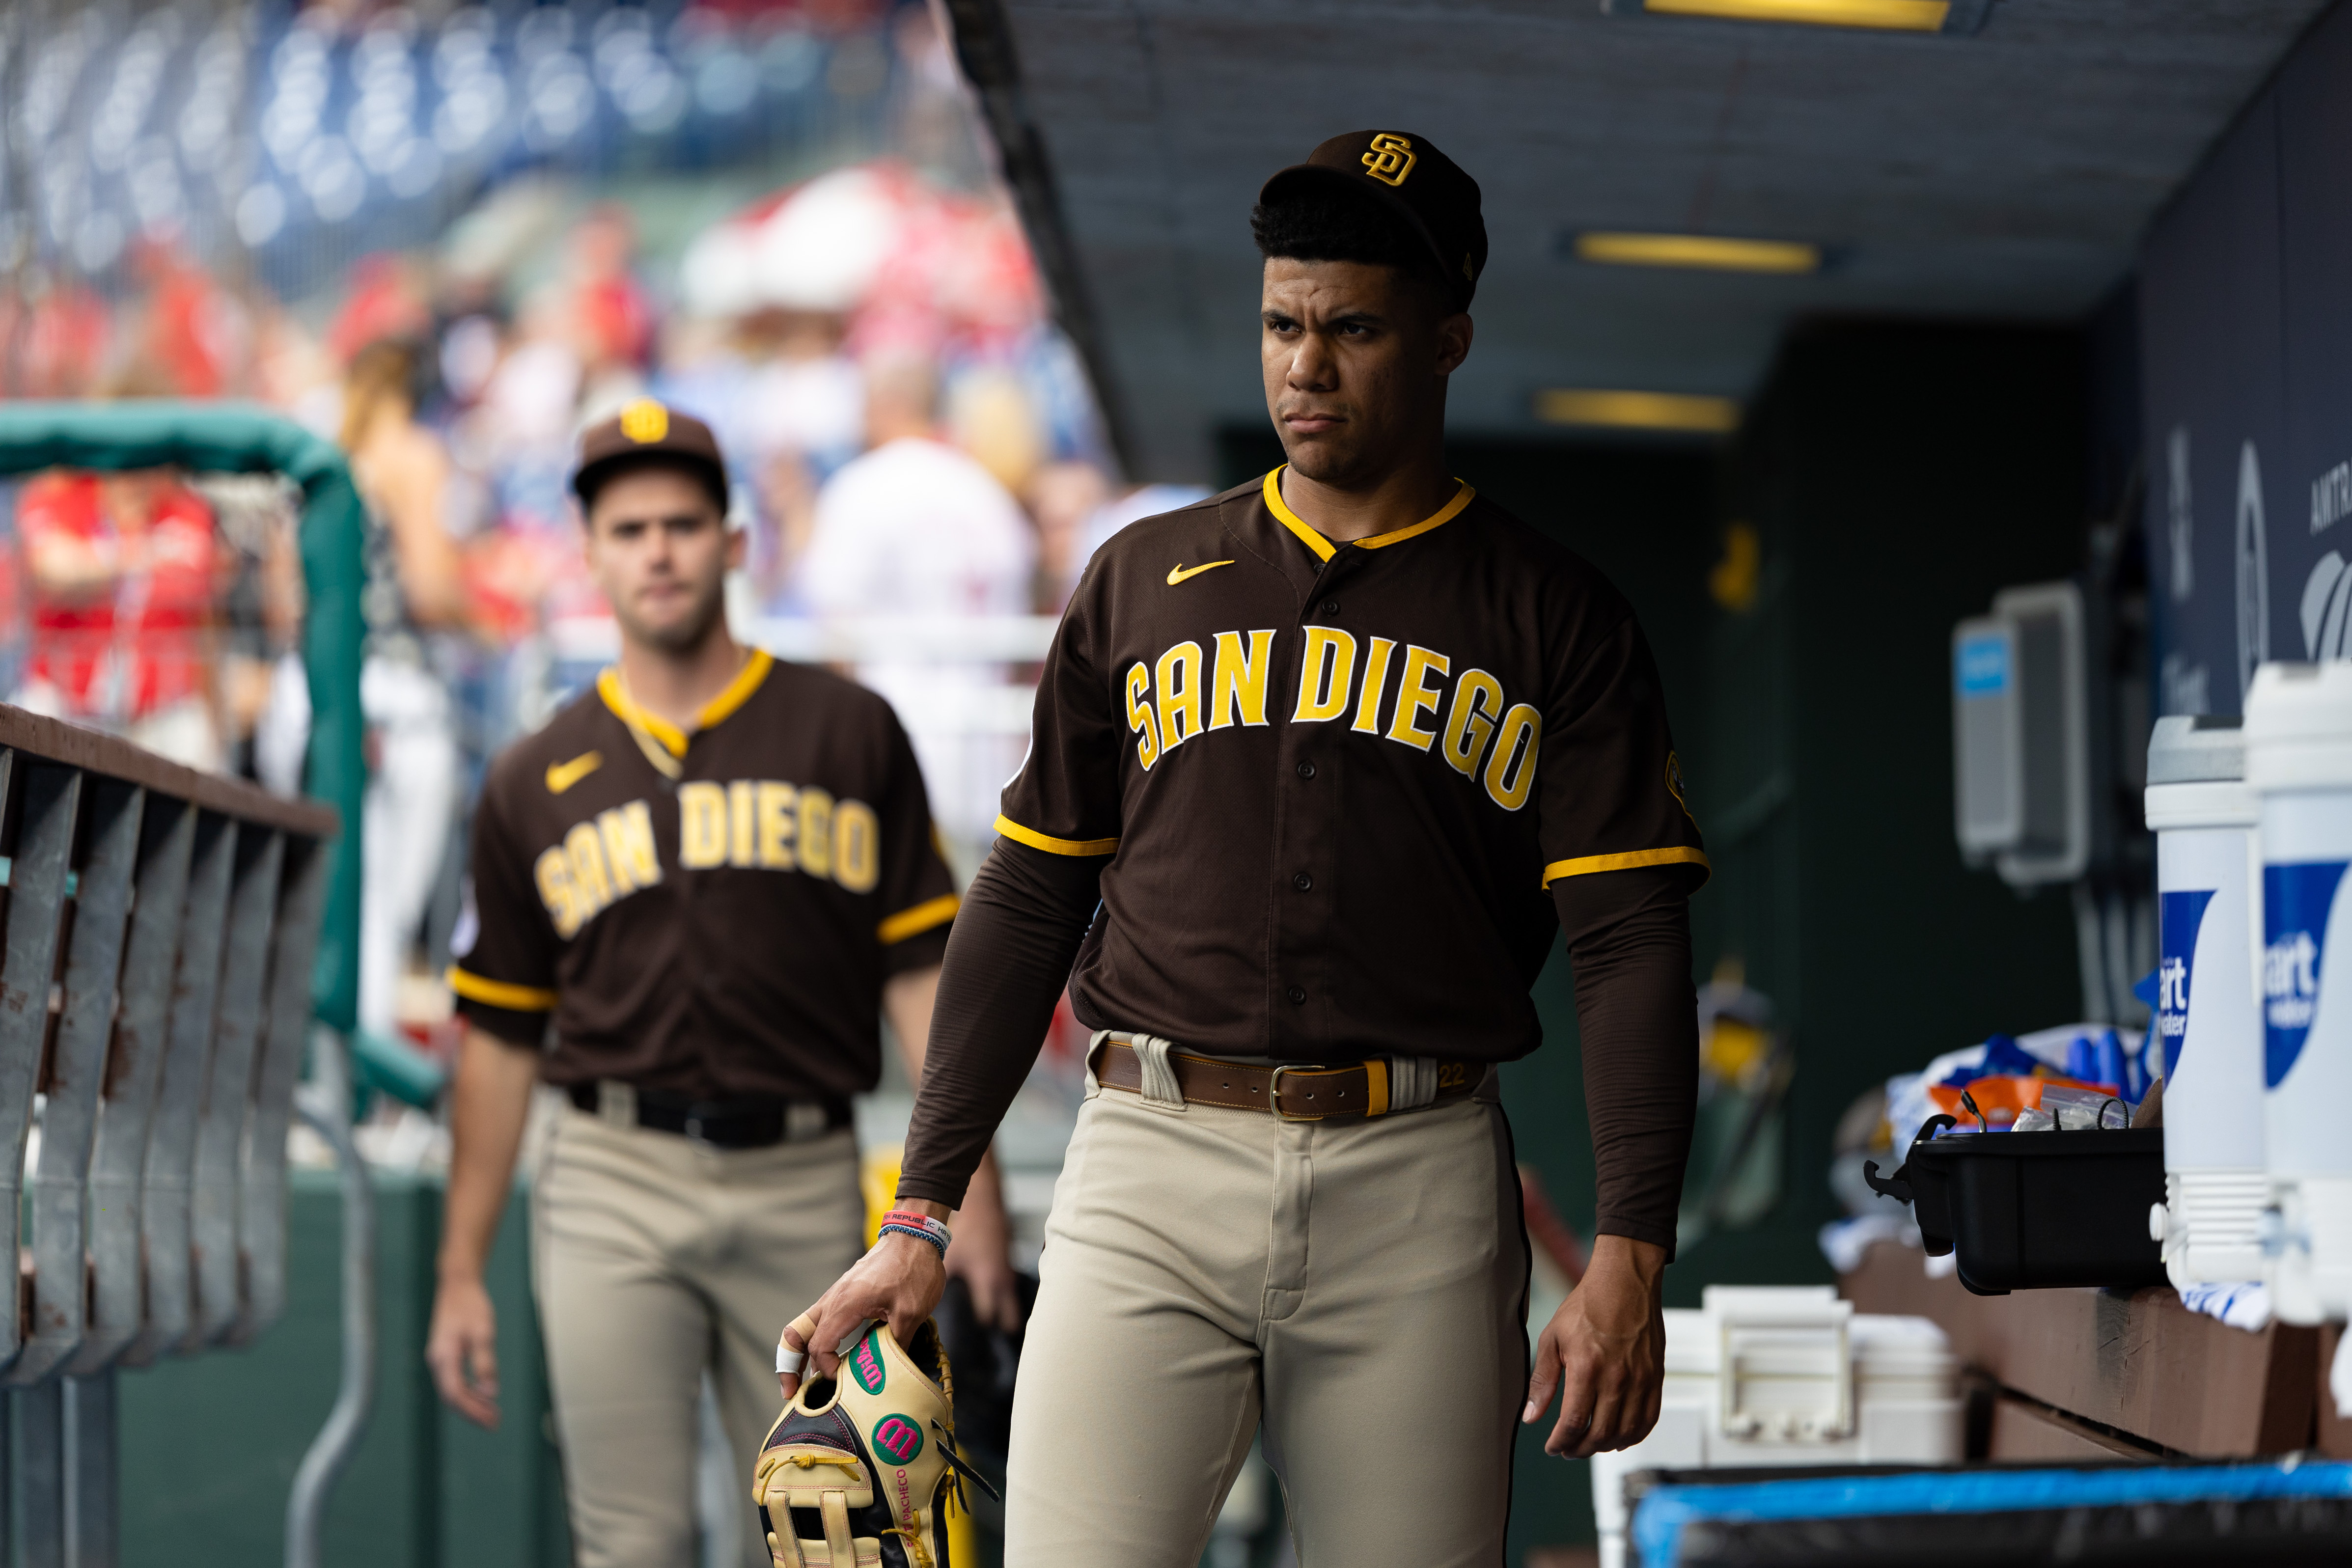 padres brown and yellow uniforms